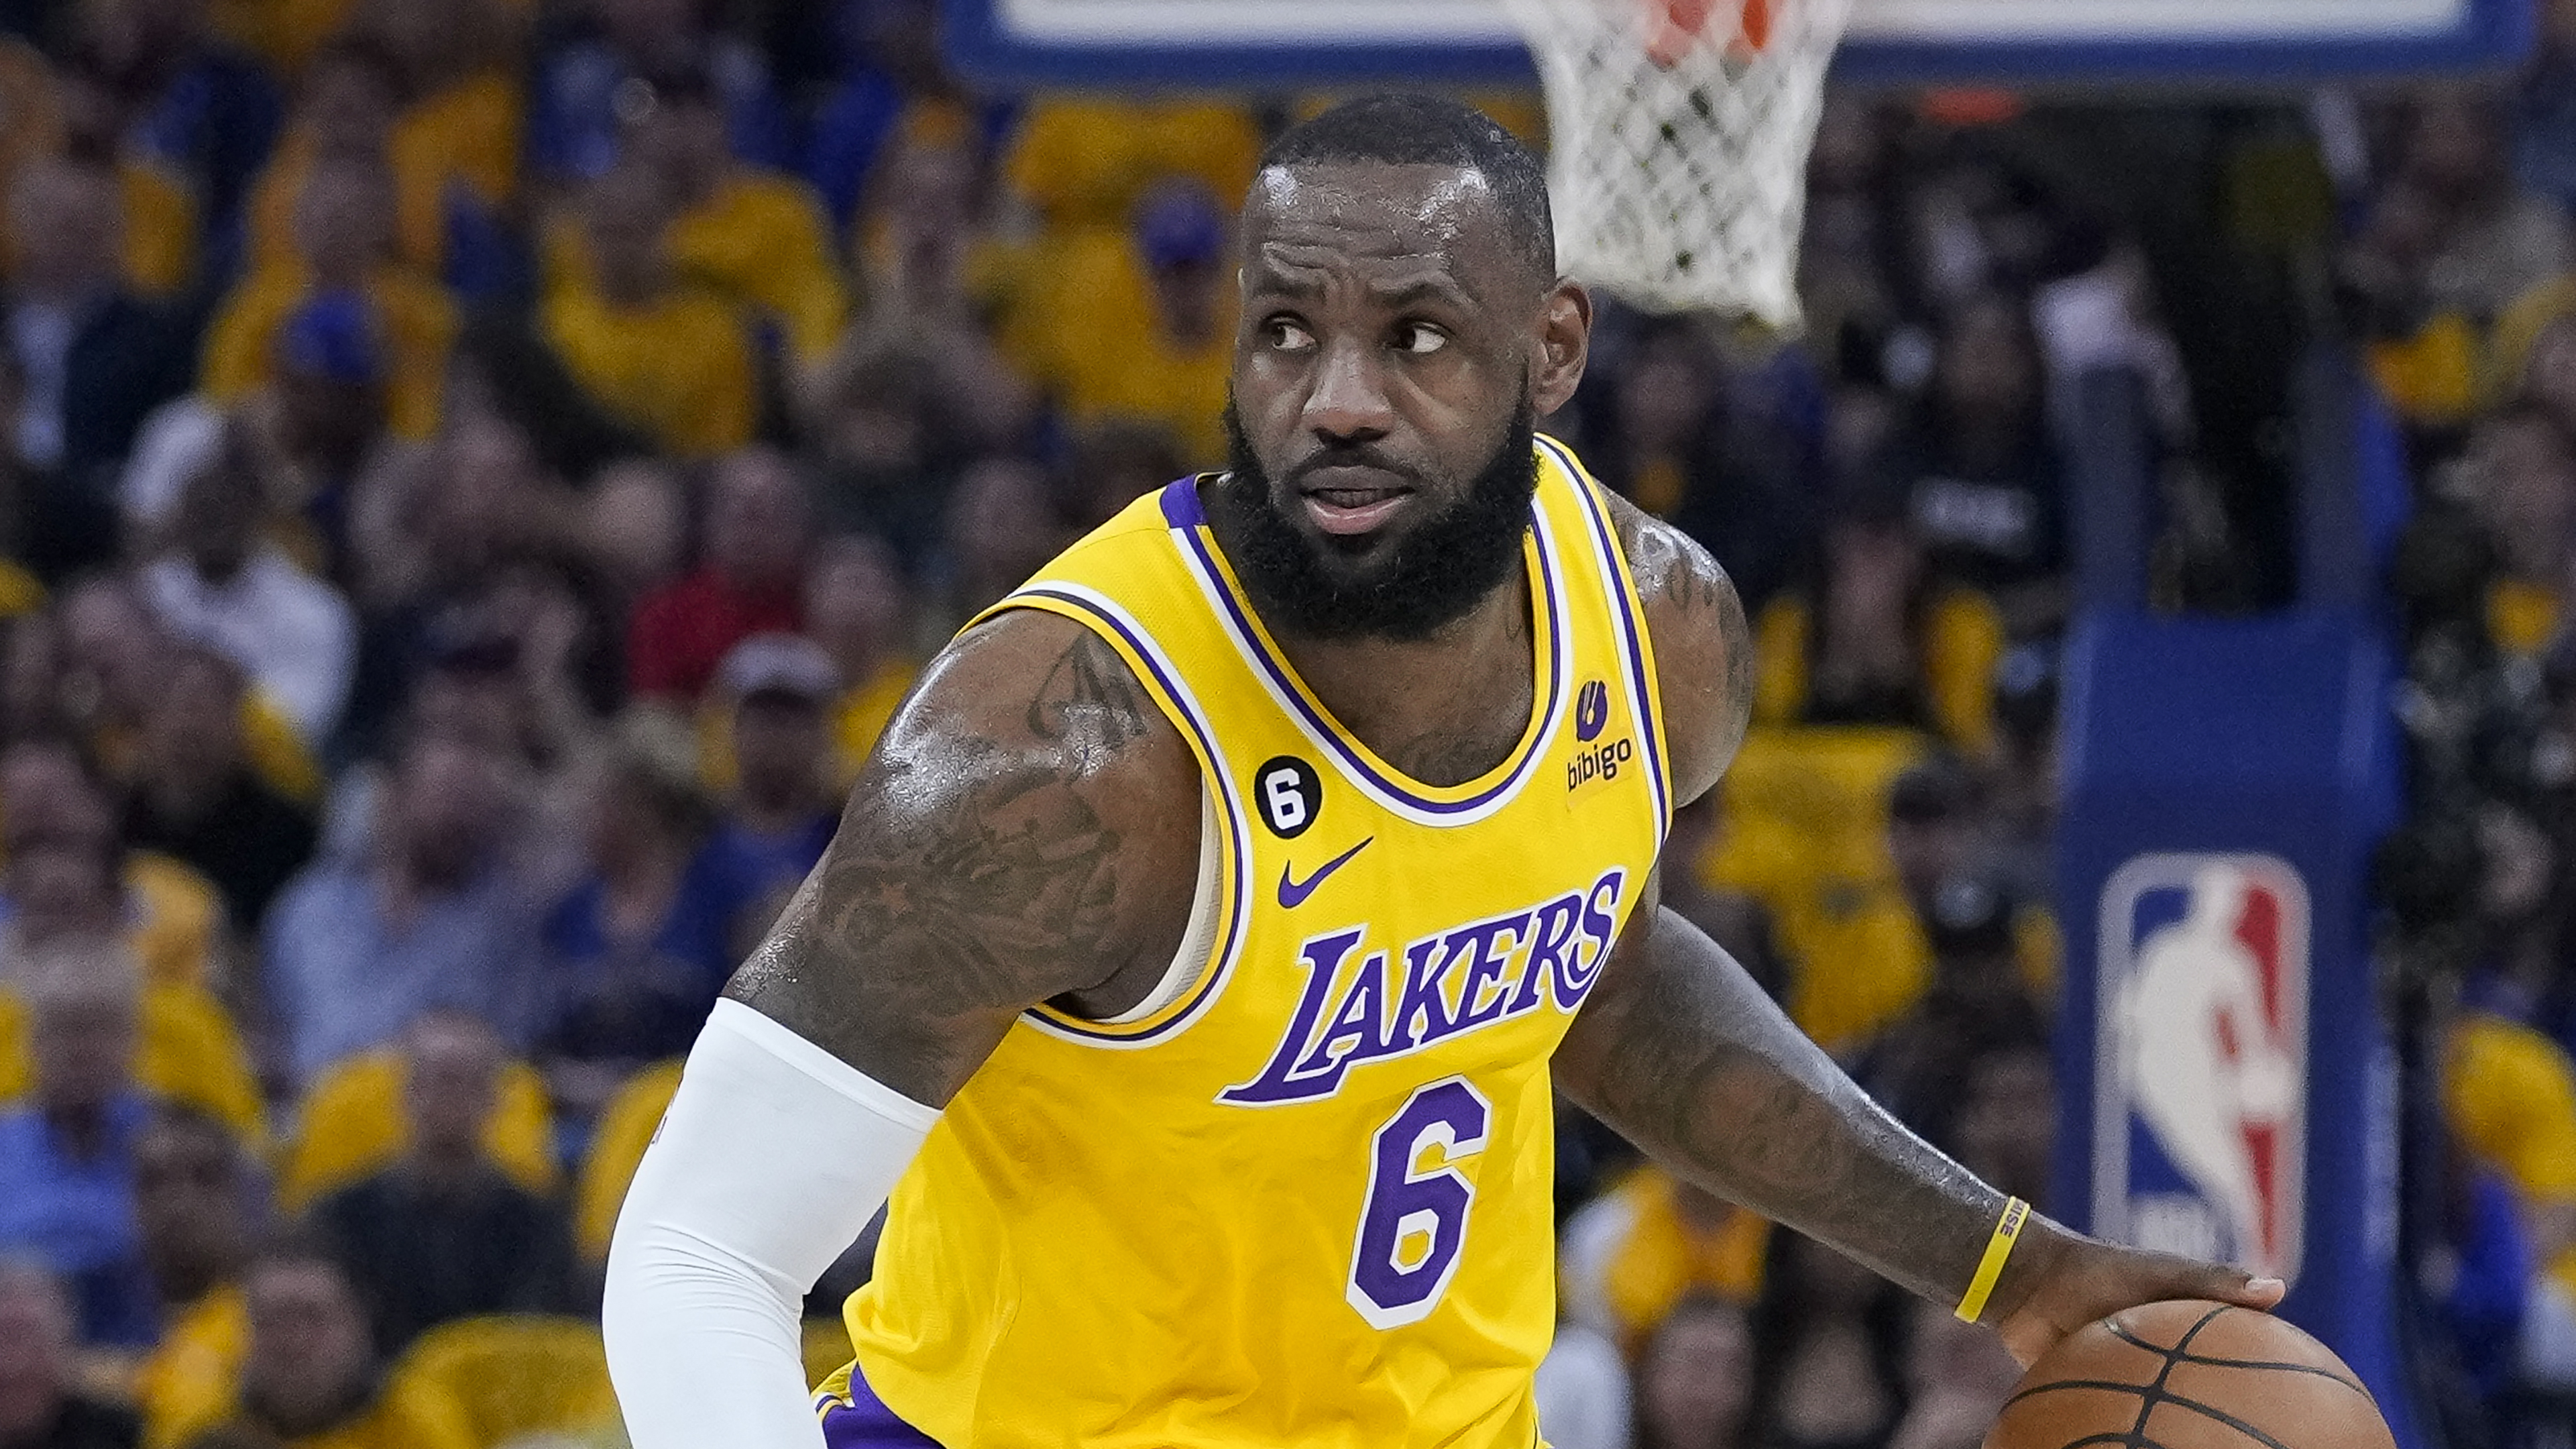 Los Angeles Lakers vs Golden State Warriors Game 6 Free live stream (5/12/23)